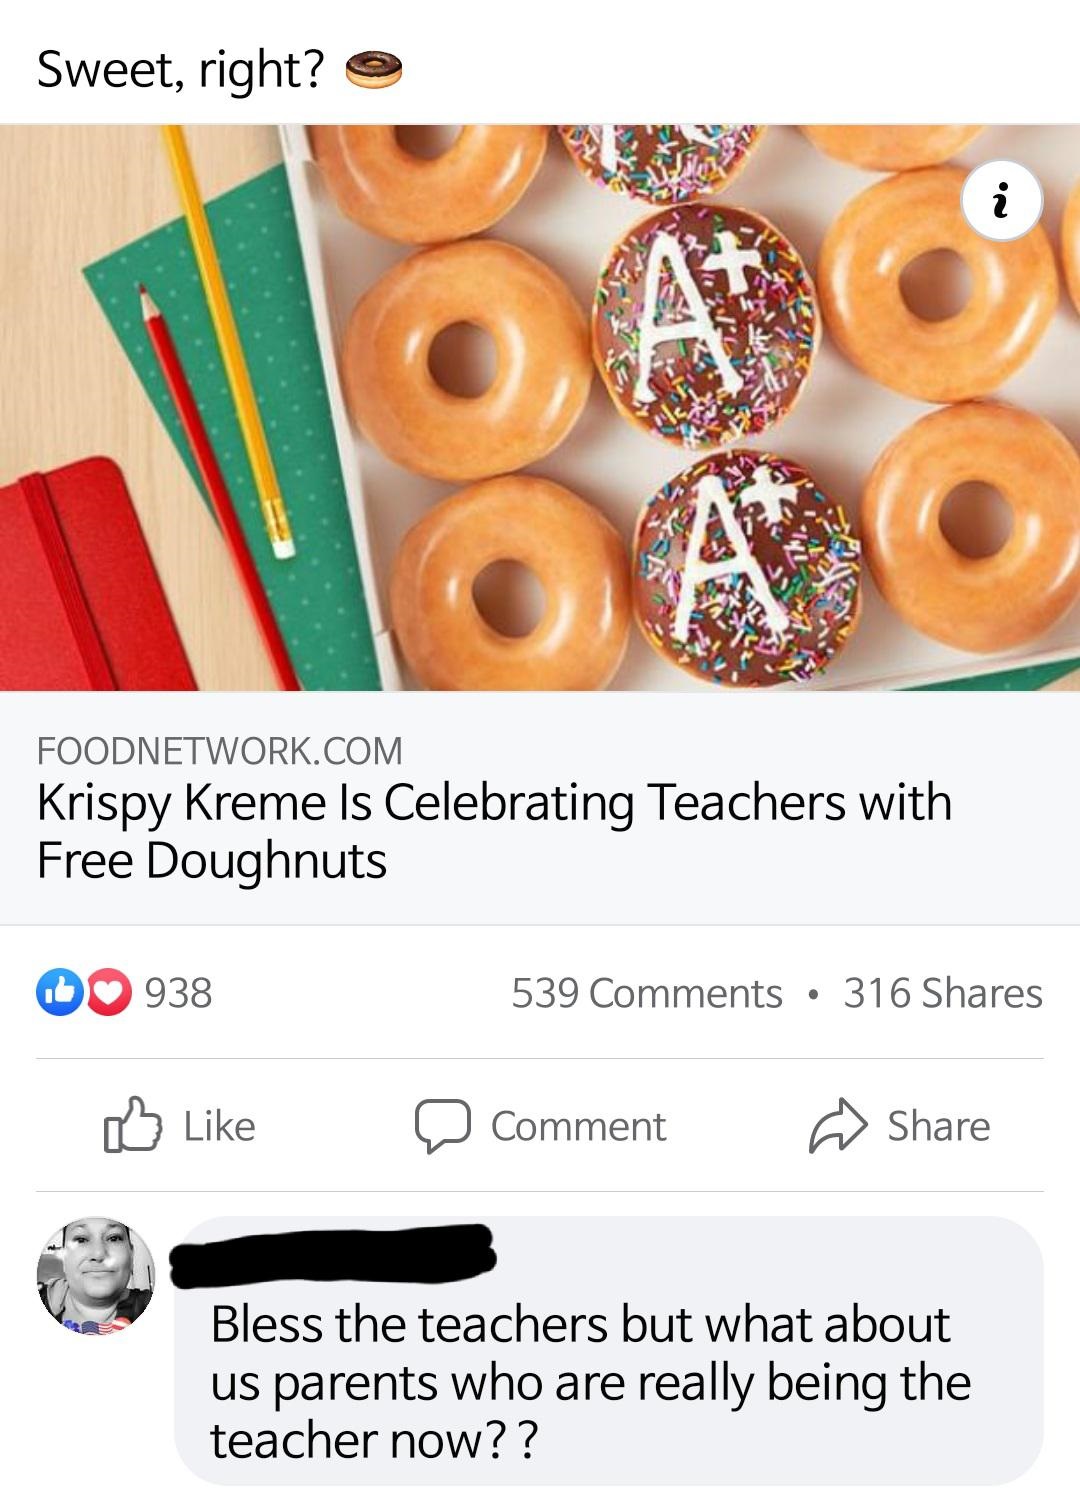 krispy kreme is celebrating teachers with free doughnuts - bless the teachers but what about us parents who are really being the teacher now?